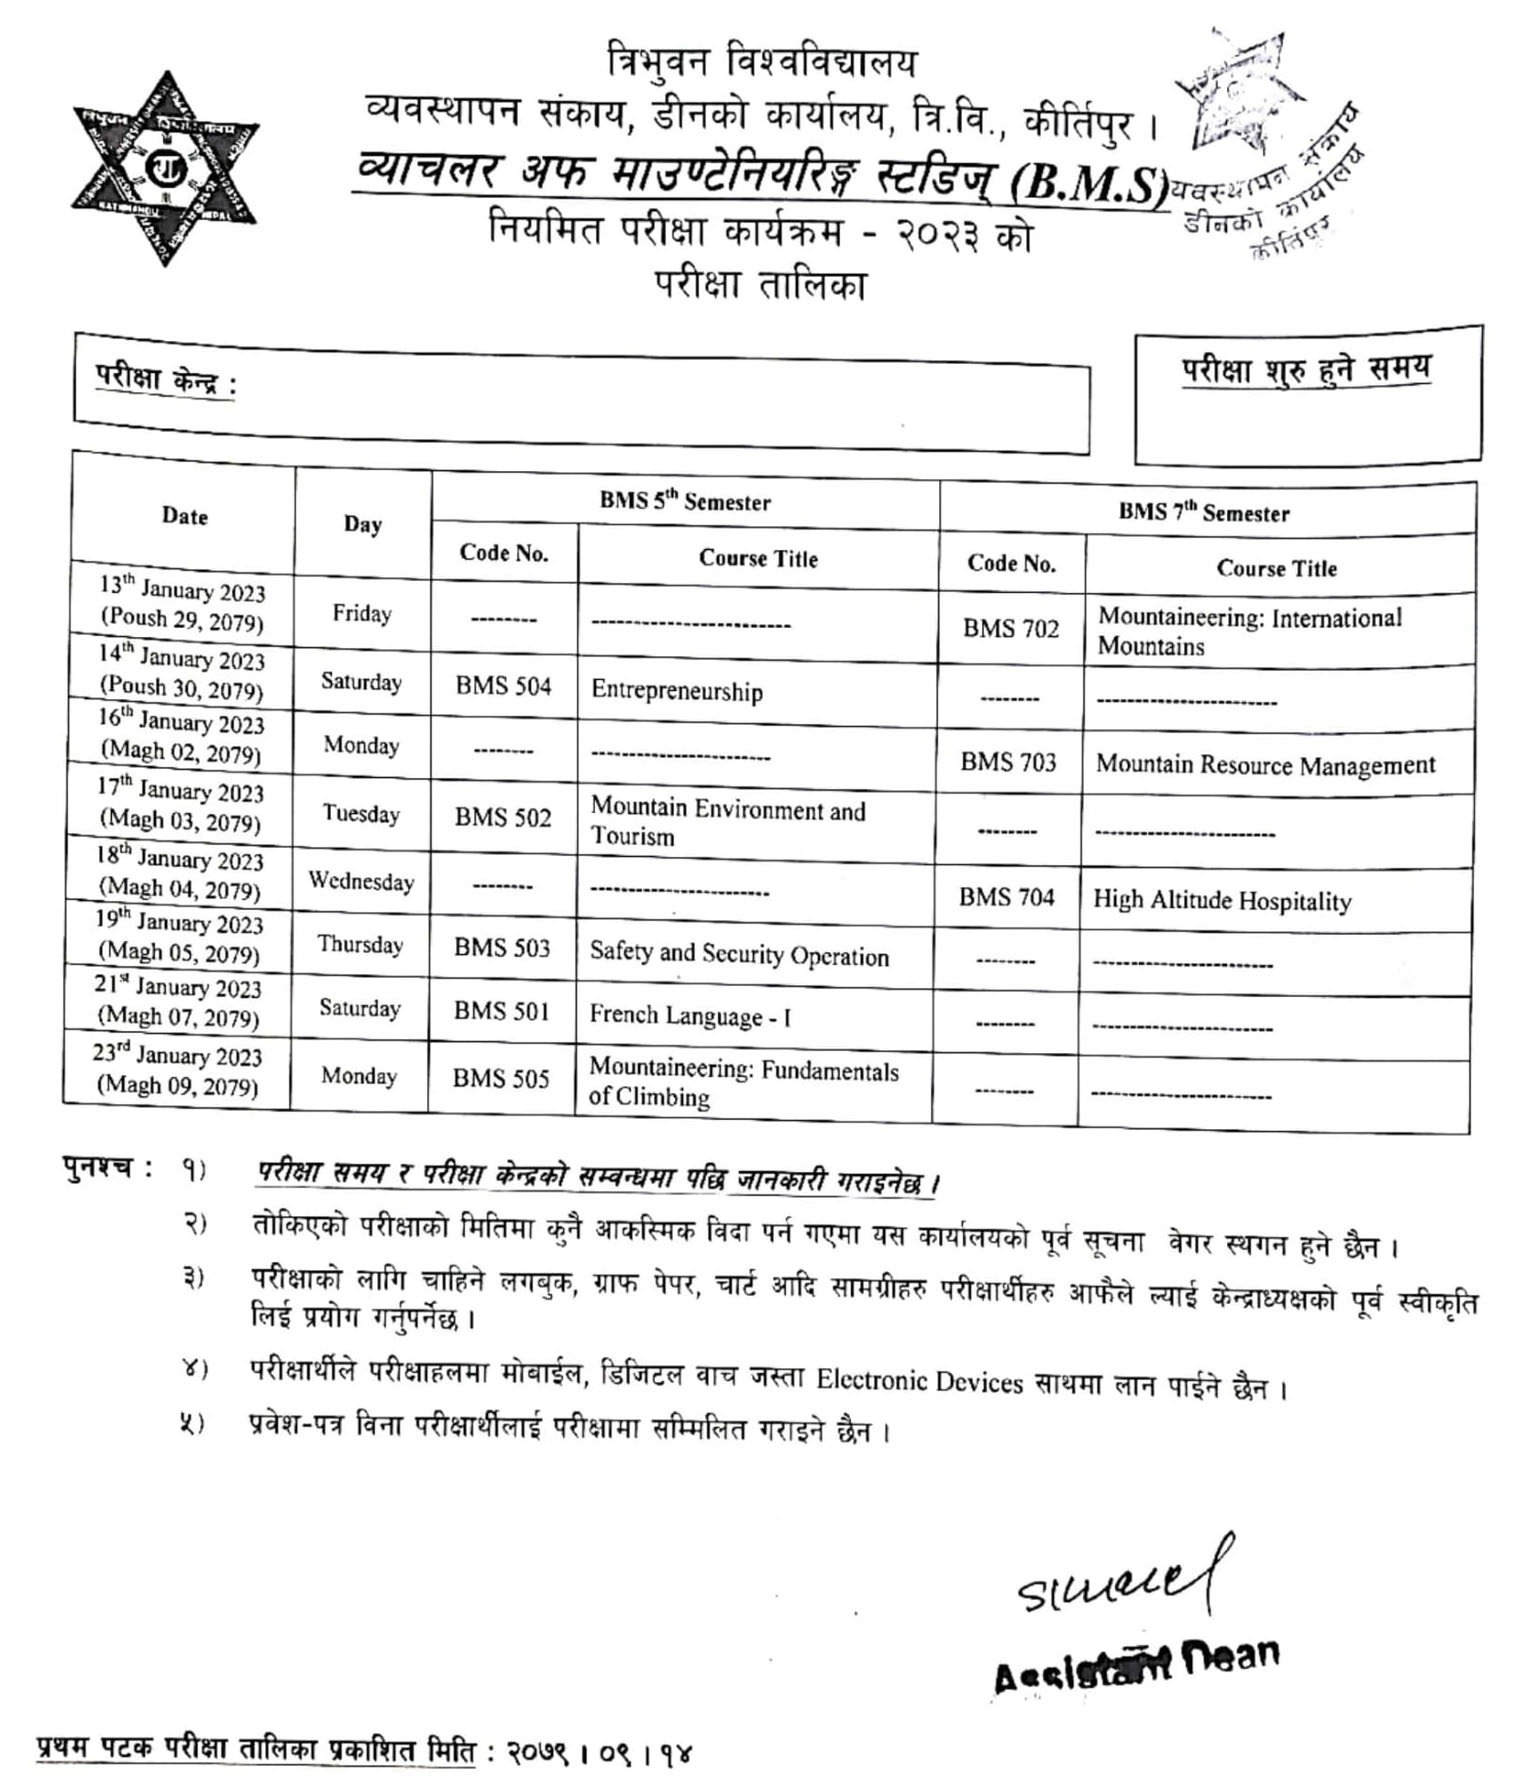 Tribhuvan University Faculty of Management, Dean's Office, TU, Kirtipur has published the examination schedule for Bachelor of Mountaineering Studies (BMS) 5th semester regular examination program 2023.